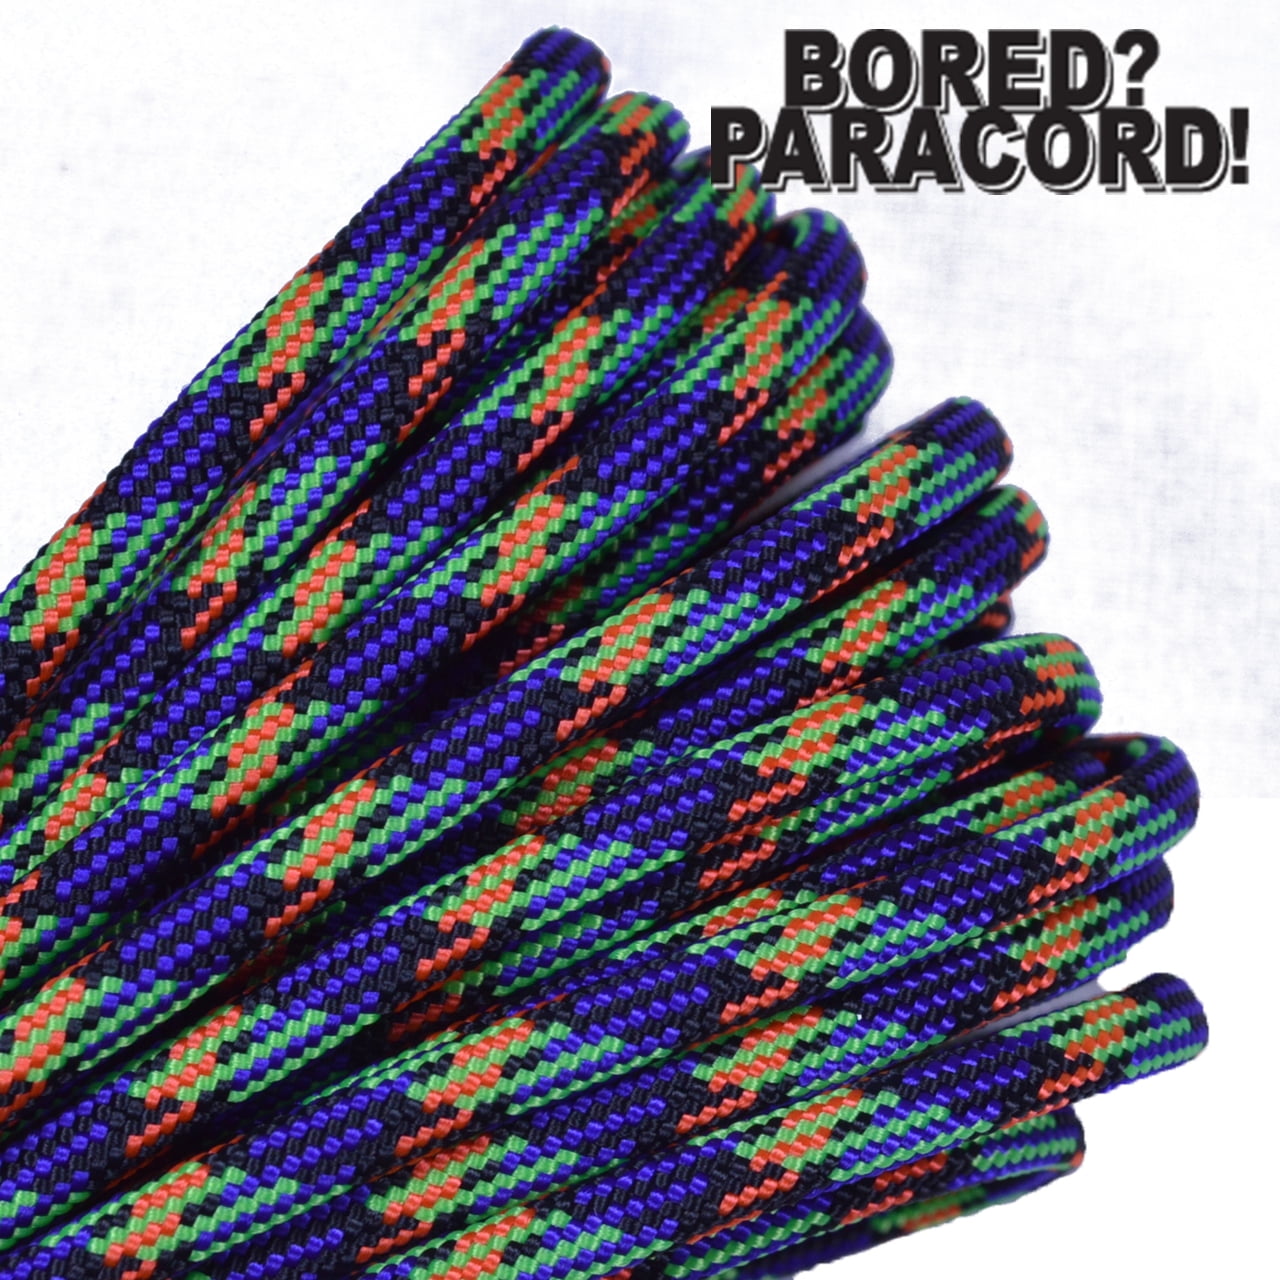 Bored Paracord Brand 550 lb Type III Paracord - Think Pink 100 Feet 